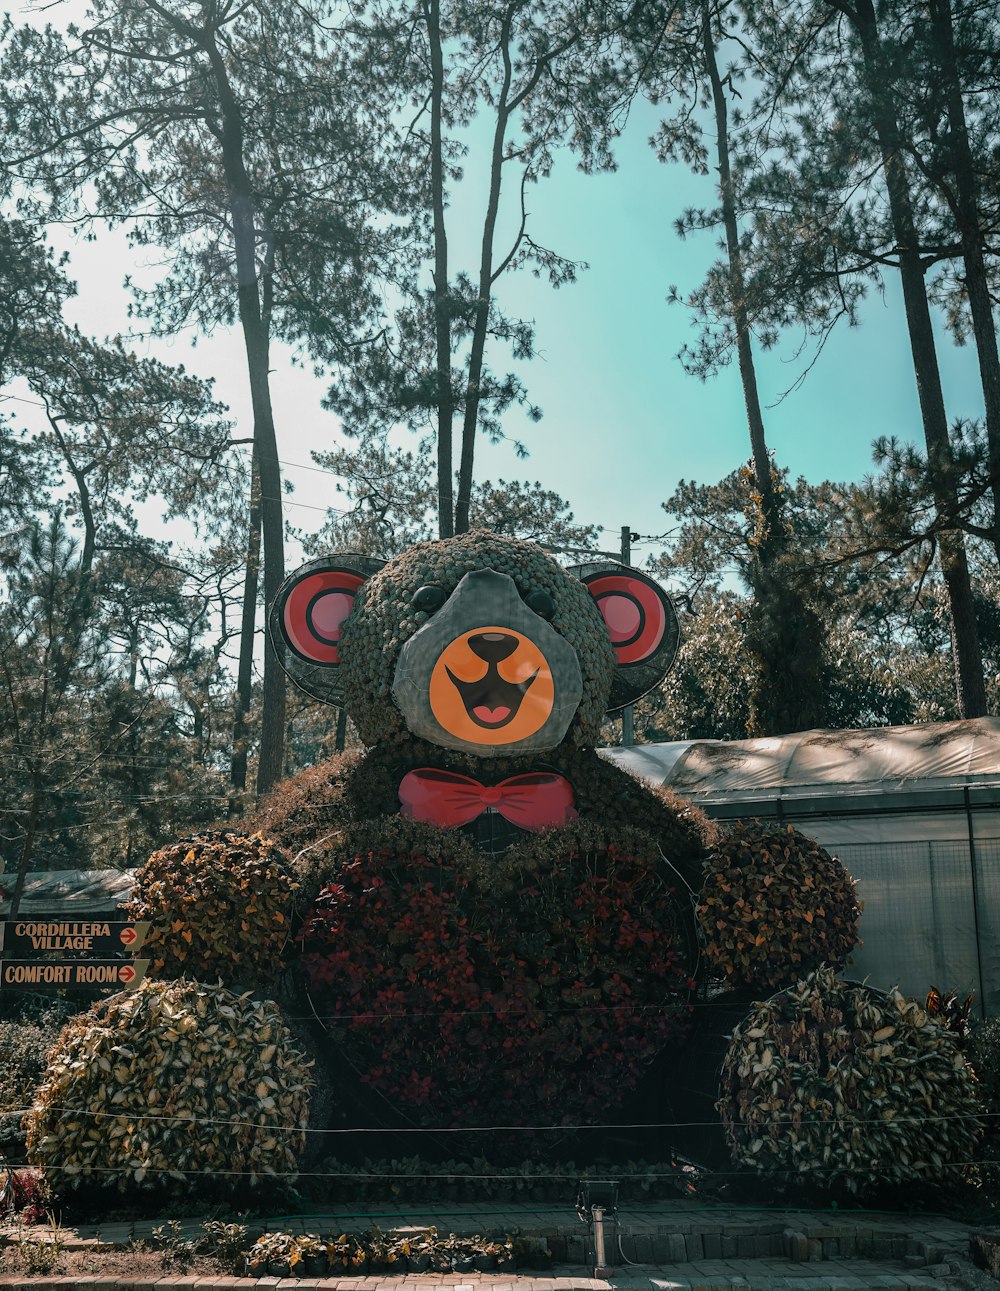 a large teddy bear made out of flowers